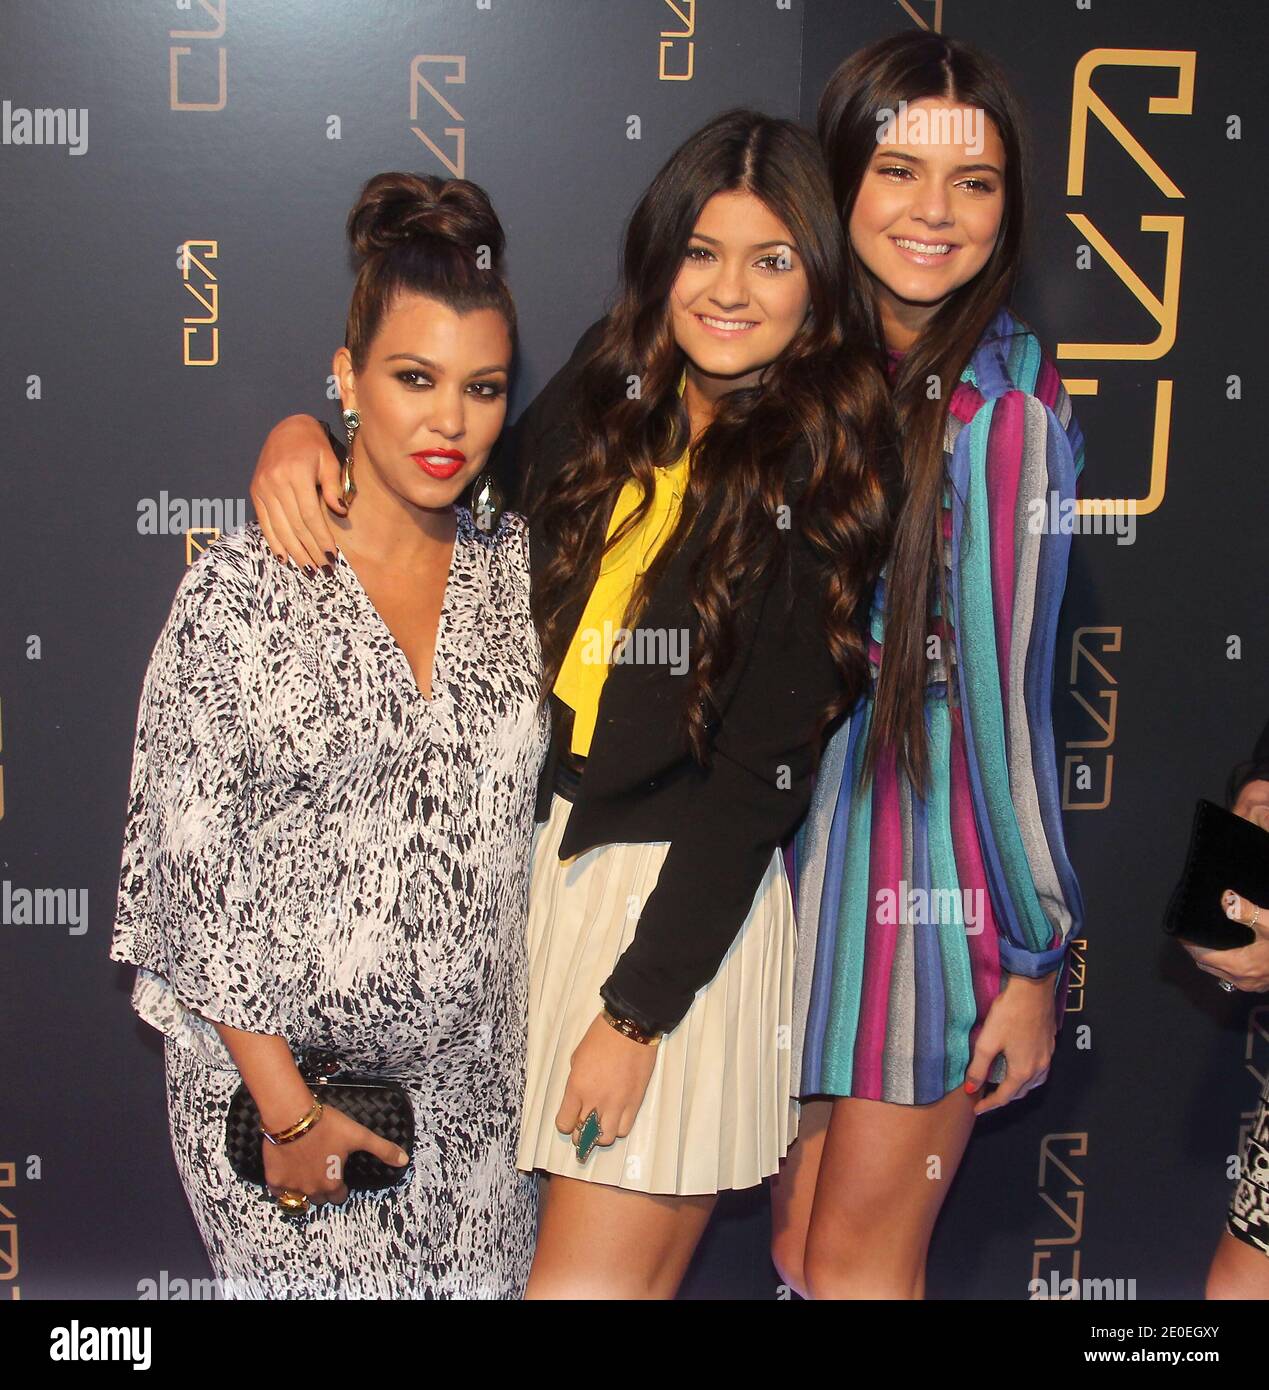 L-R) Kourtney Kardashian, Kylie Jenner and Kendall Jenner arriving for the  Grand Opening of Scott Disick's RYU restaurant in The Meatpacking District  in New York City, NY, USA on April 23, 2012.